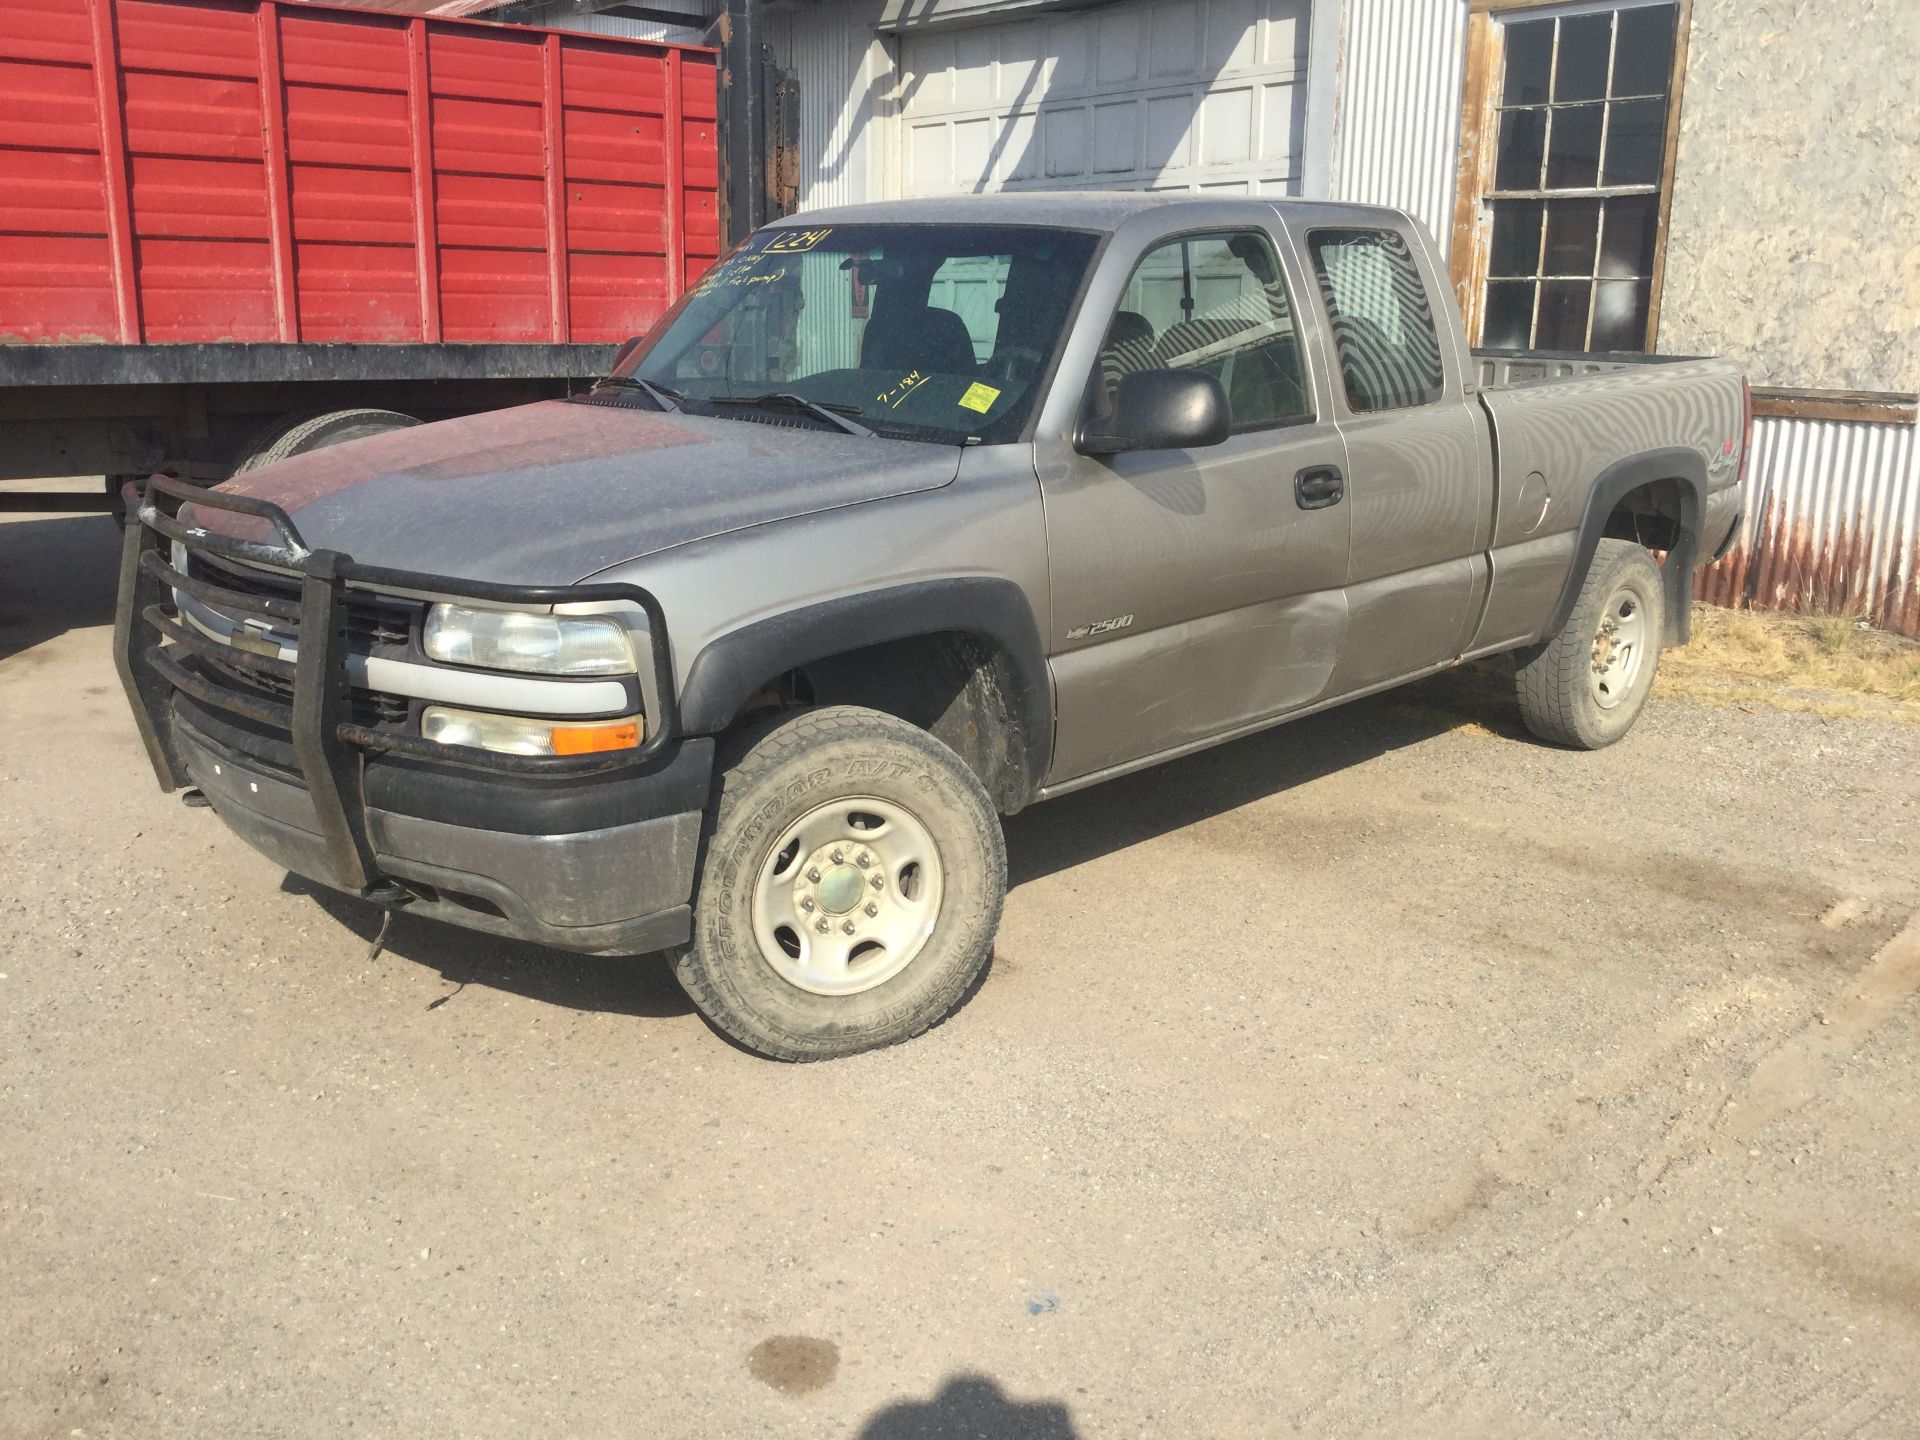 Year: 2002 Make: Chevy Model: 3/4T Type: Pickup Vin#: 234762 Mileage/Hours: 194314 6.0L, 4x4, XC,